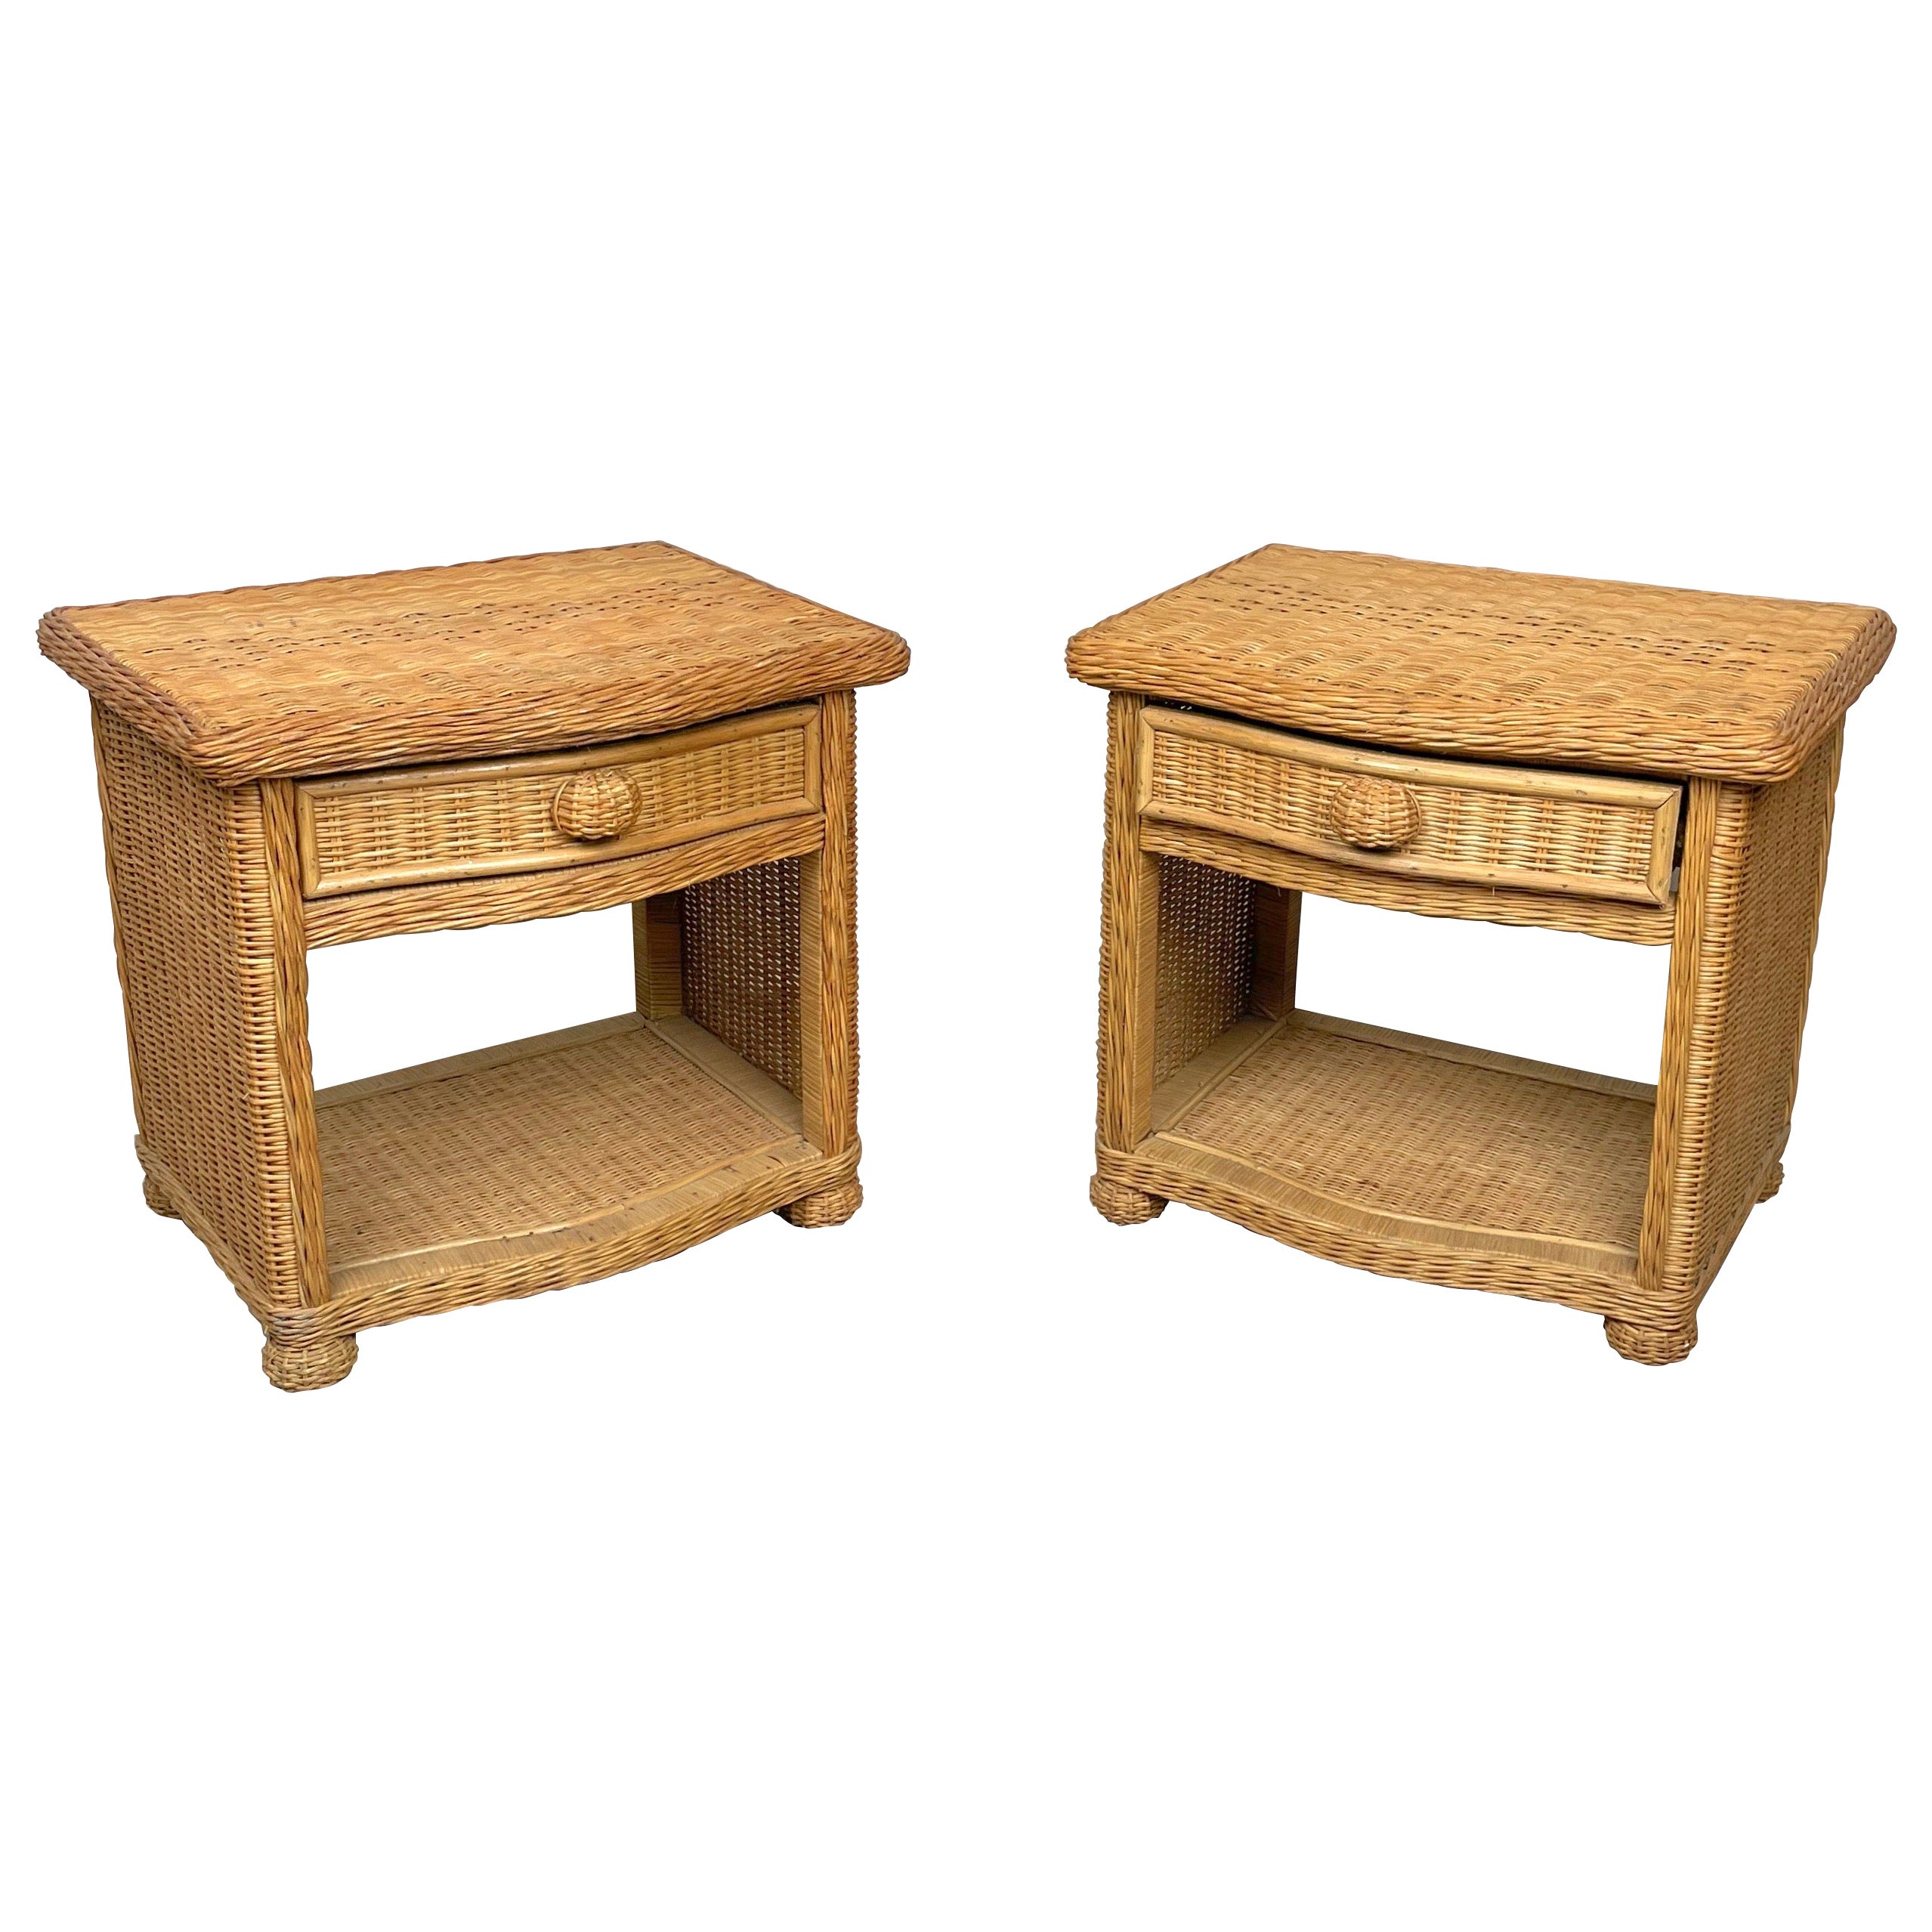 Pair of Bed Side Tables Rattan & Wicker Attributed to Vivai Del Sud, Italy 1970s